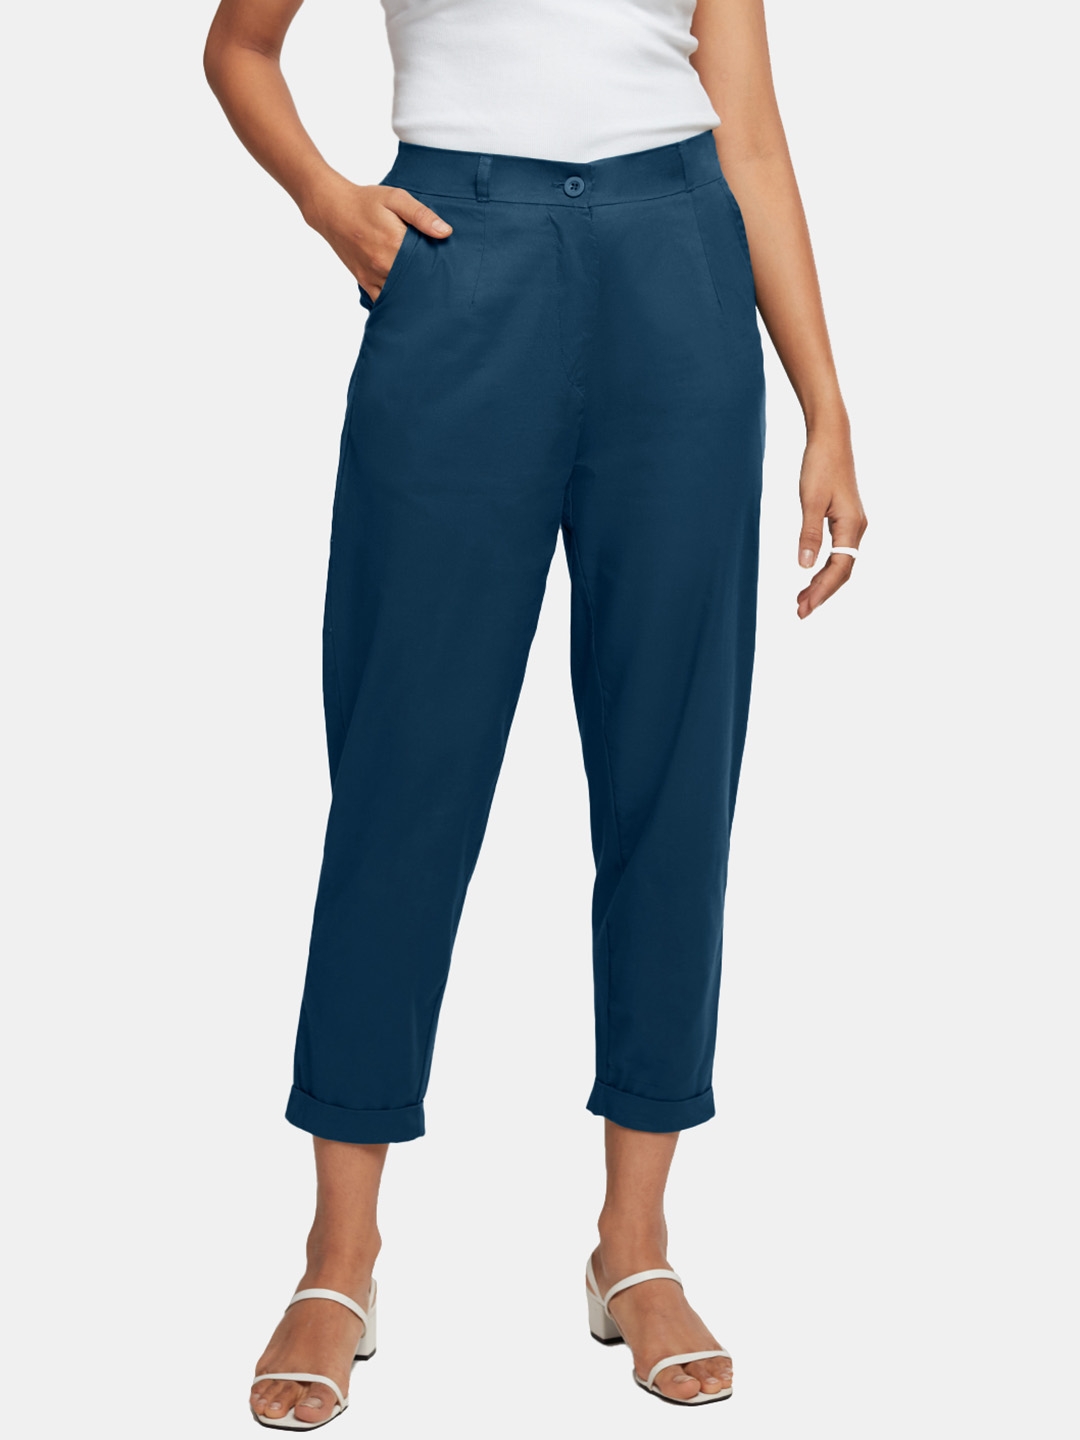 Latest W Cigarette Trousers arrivals - Women - 3 products | FASHIOLA.in